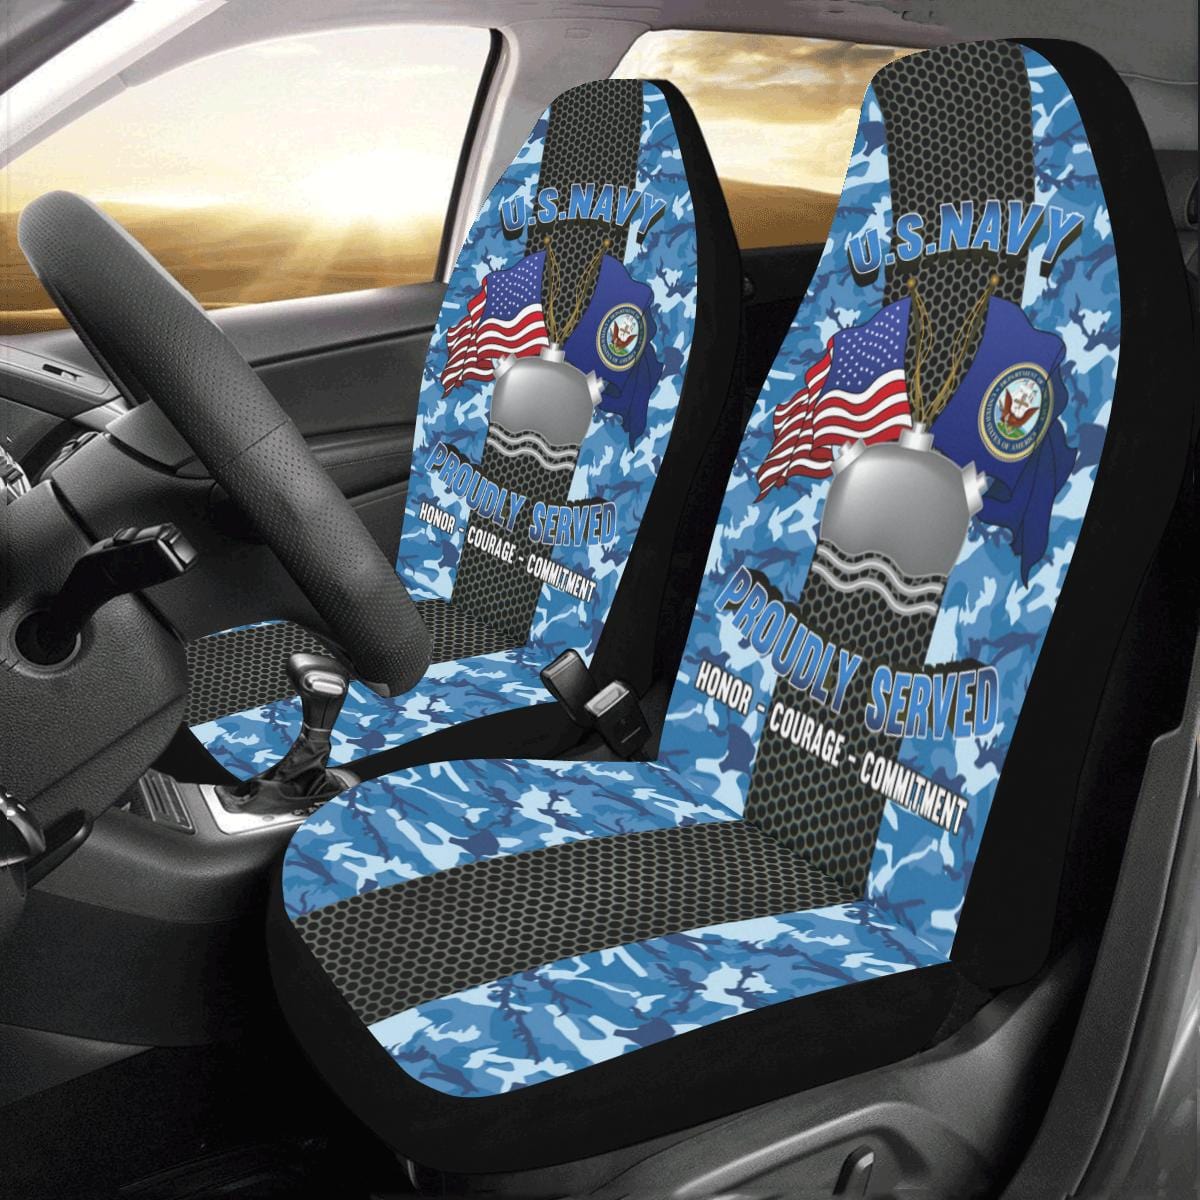 Navy Mineman Navy MN Car Seat Covers (Set of 2)-SeatCovers-Navy-Rate-Veterans Nation